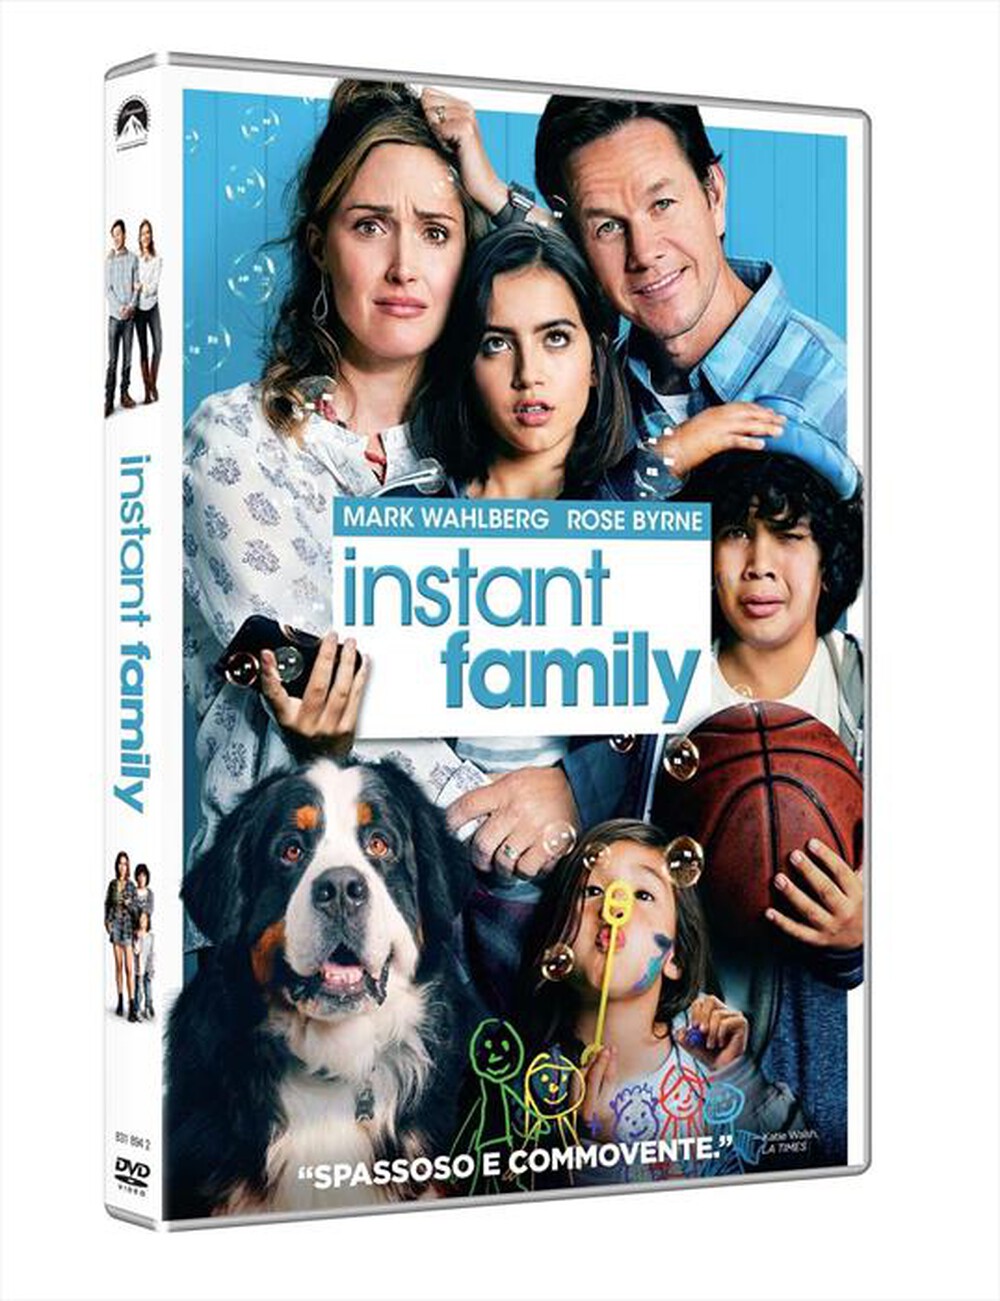 "UNIVERSAL PICTURES - Instant Family"